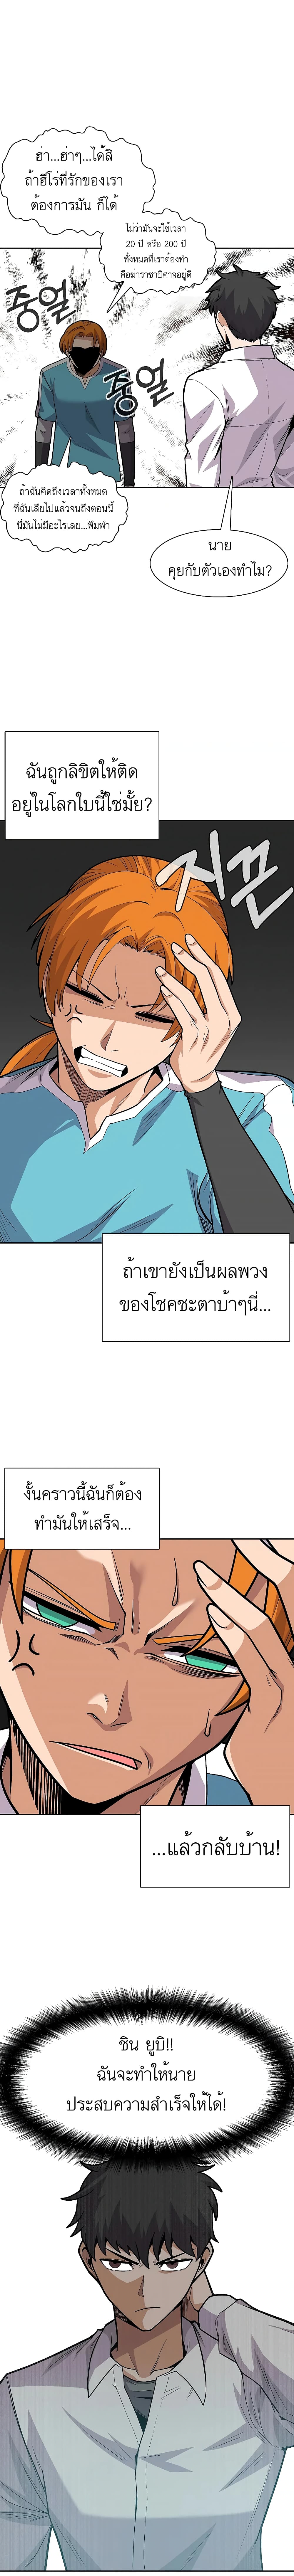 Raising Newbie Heroes In Another World ตอนที่ 3 (3)